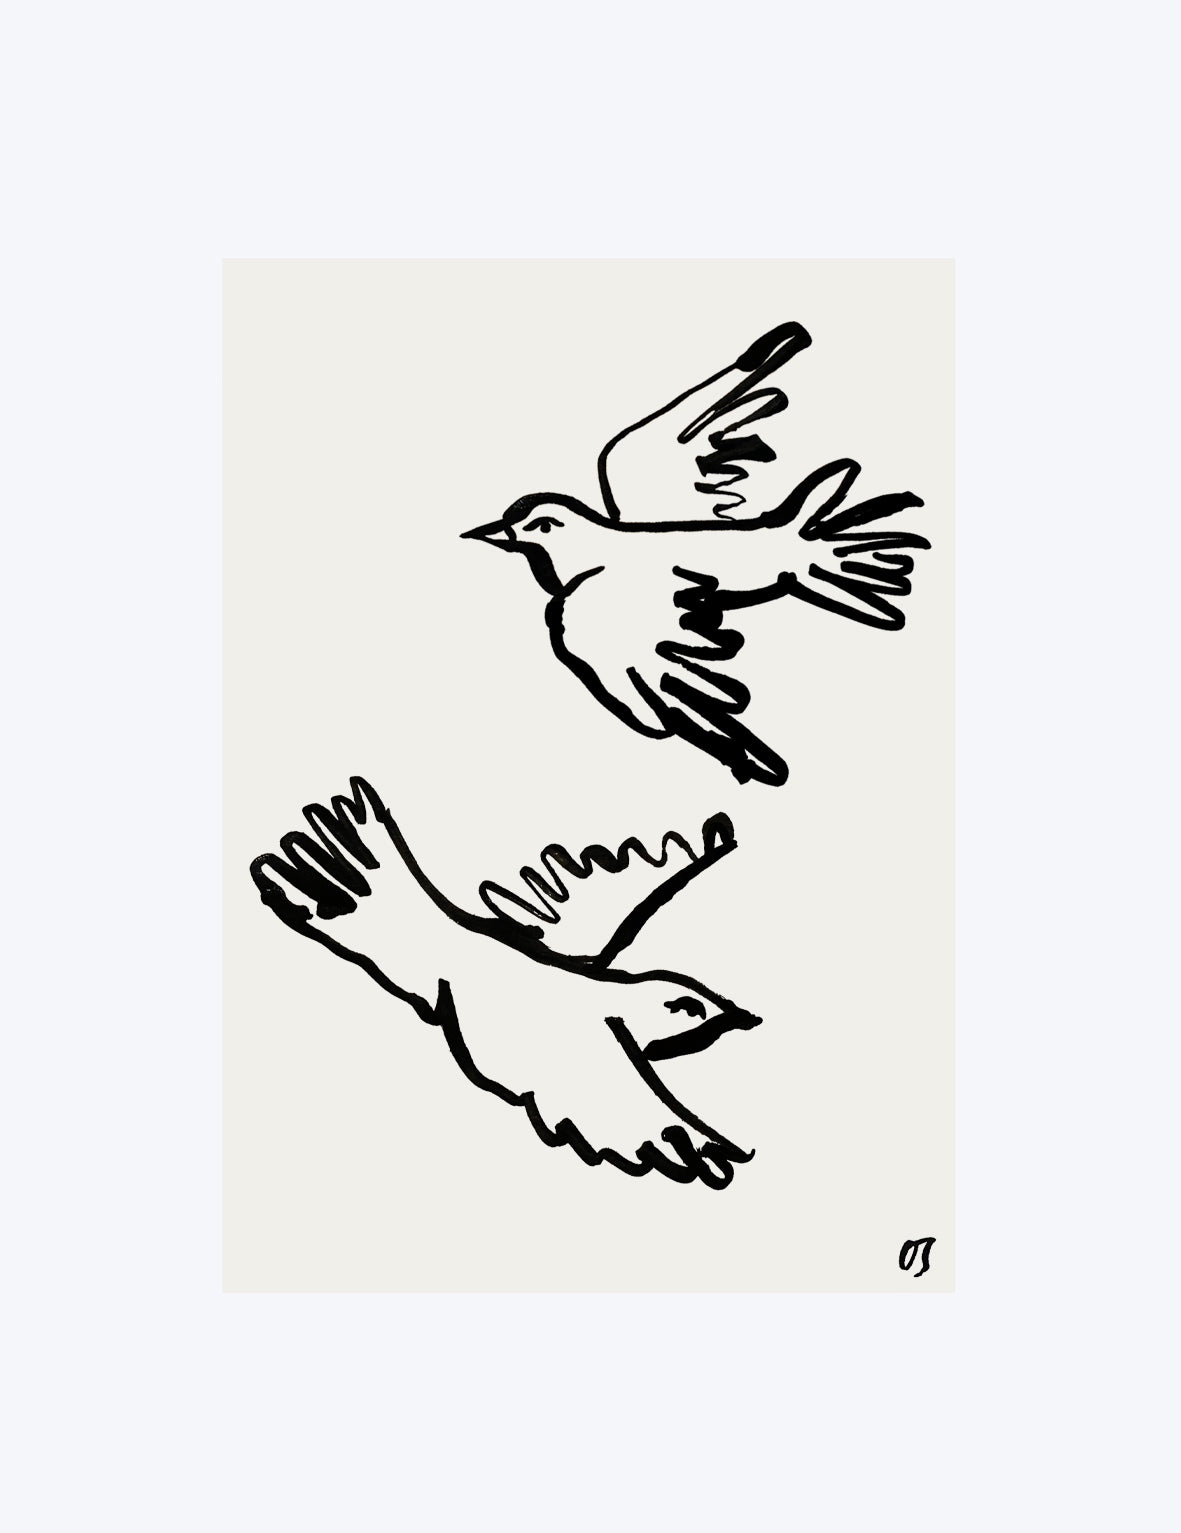 The Doves